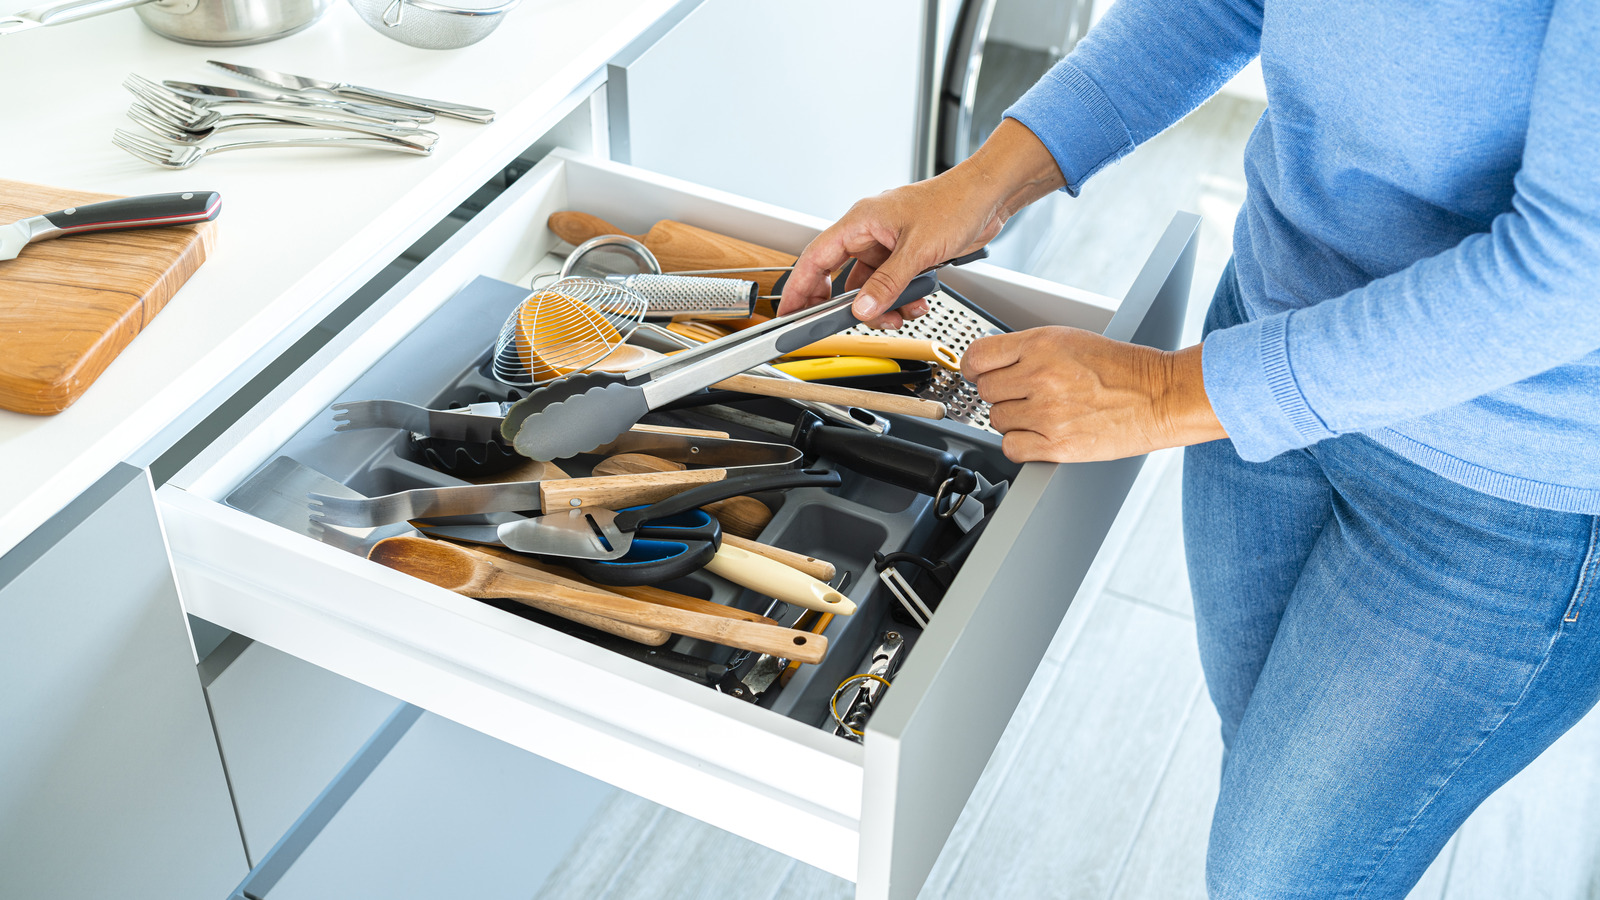 https://www.housedigest.com/img/gallery/banish-unsightly-kitchen-utensil-clutter-with-this-genius-cabinet-tip/l-intro-1696513589.jpg